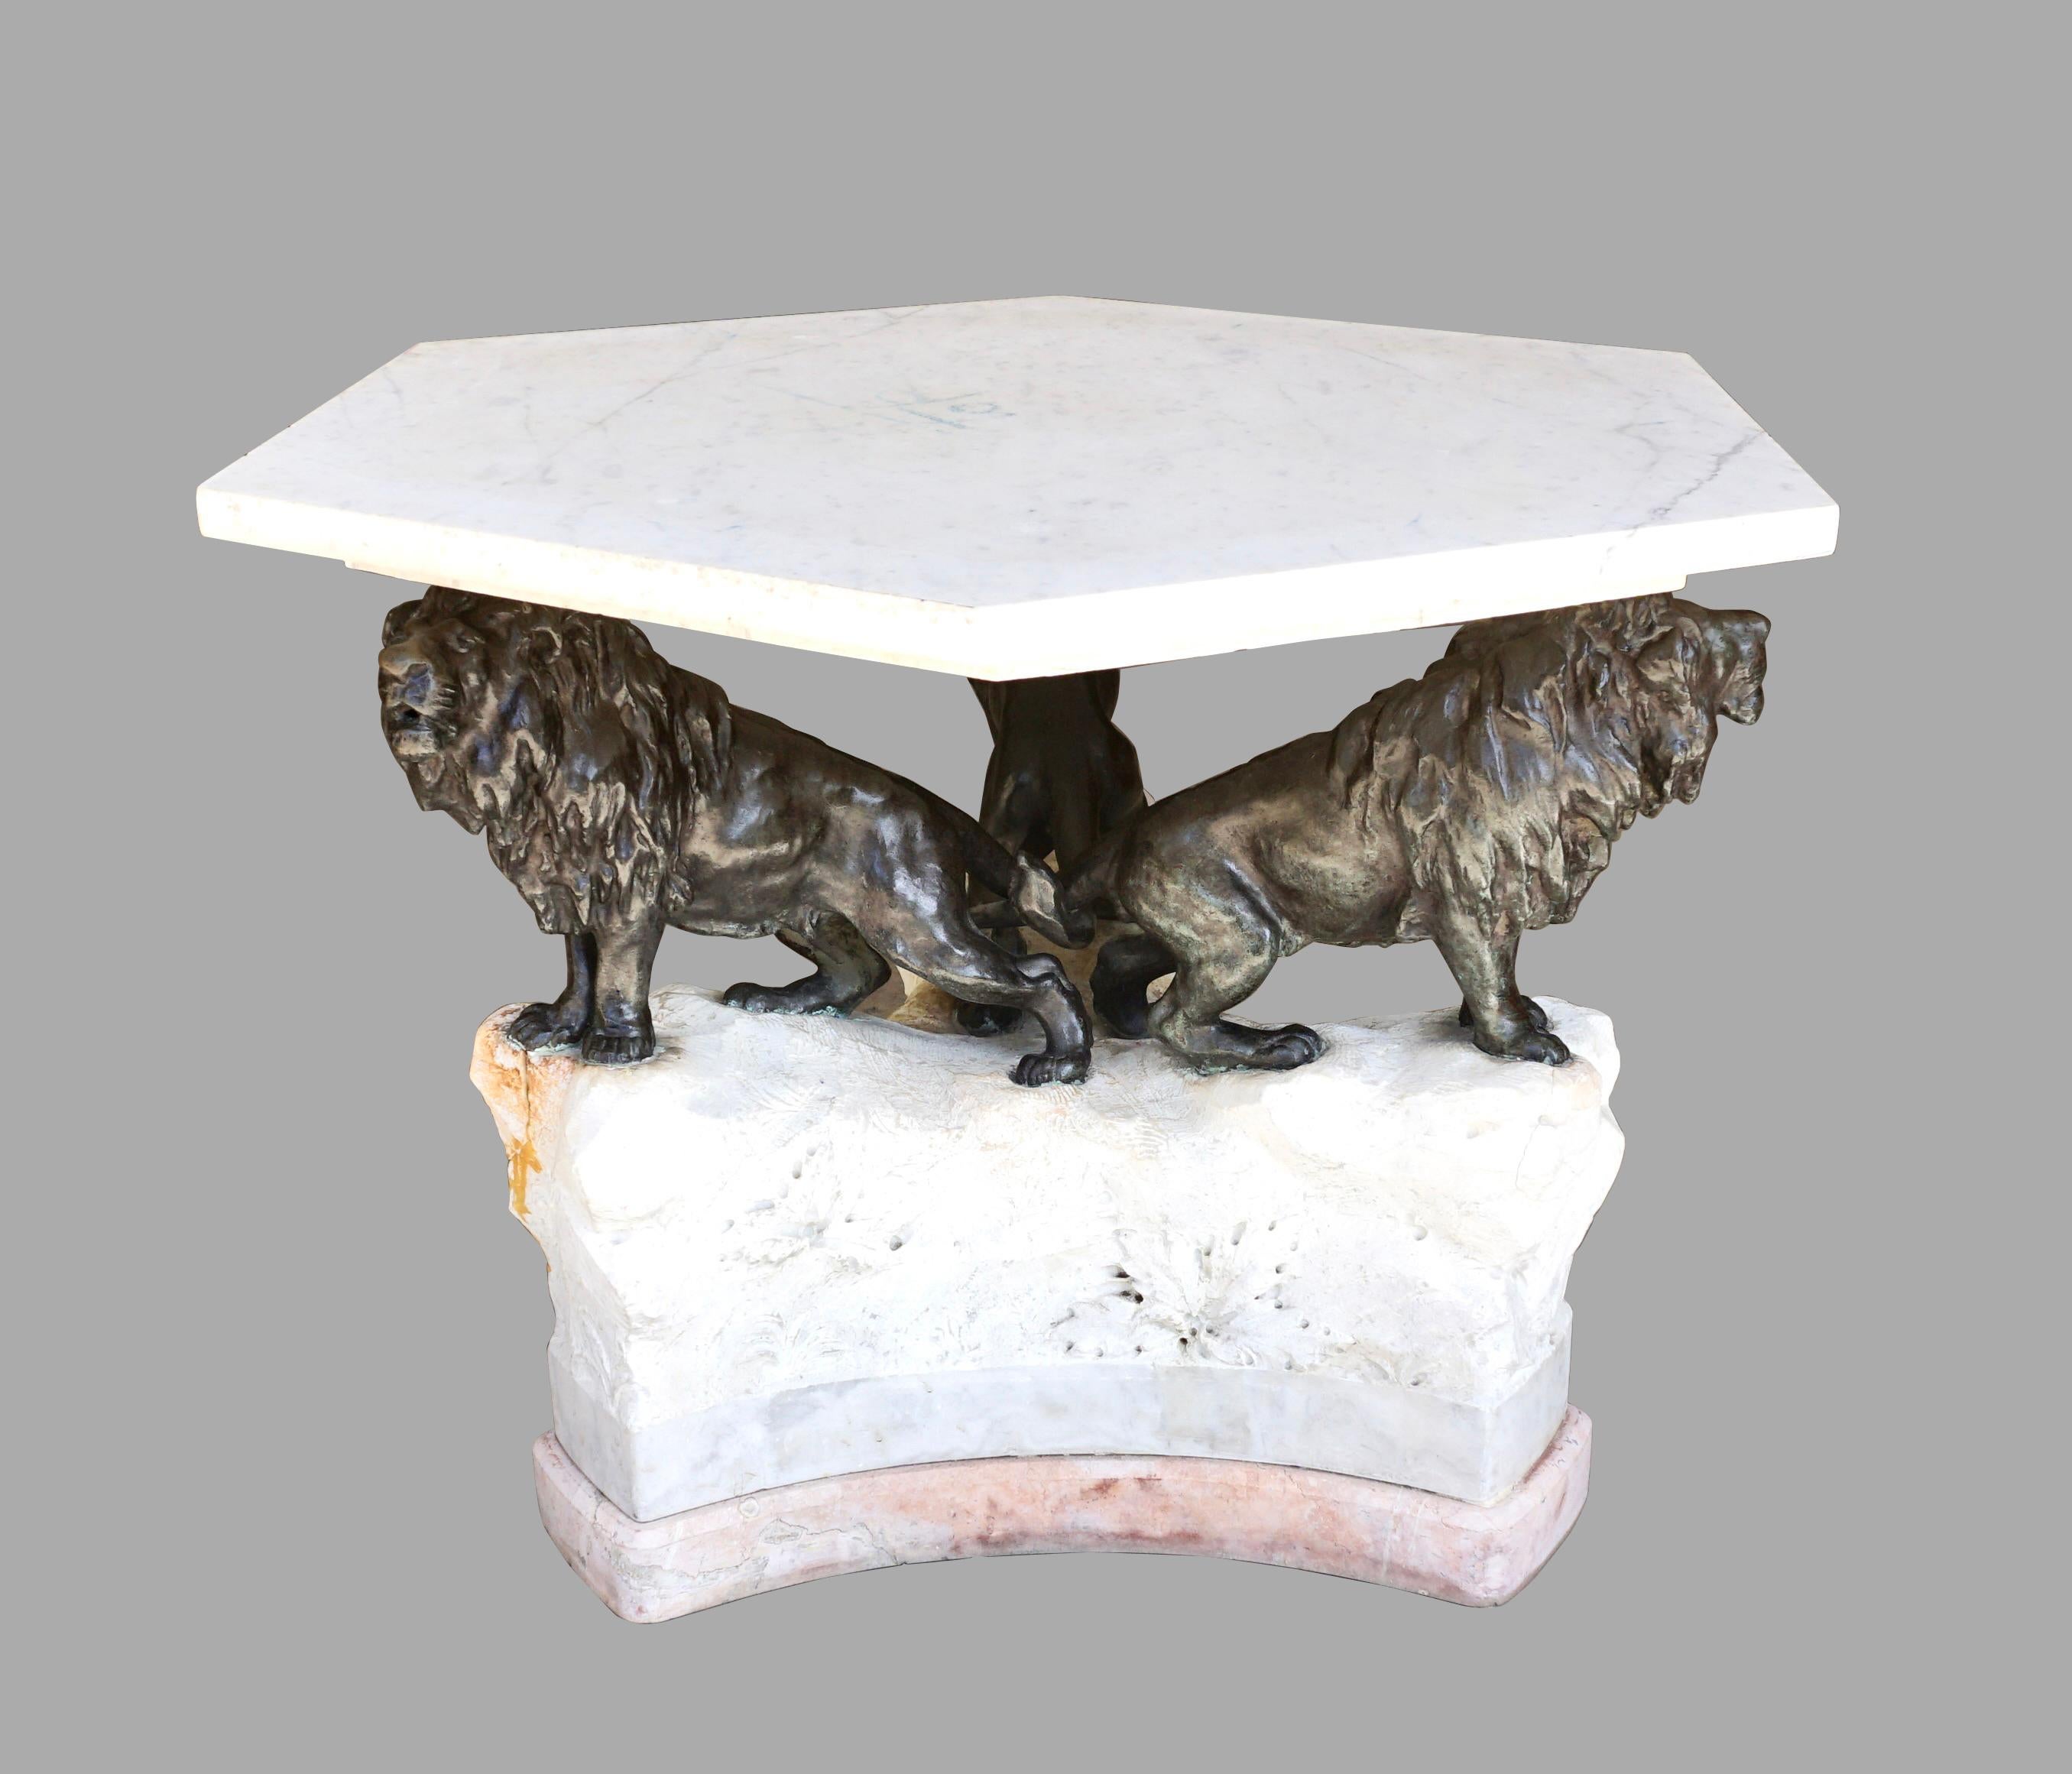 A dramatic hexagonal low table, the stone top supported by a secondary smaller stone top, all resting on a trio of well-cast bronze lions with intertwined tails on a stone base with carved leaves. This unusual piece is probably a custom design and